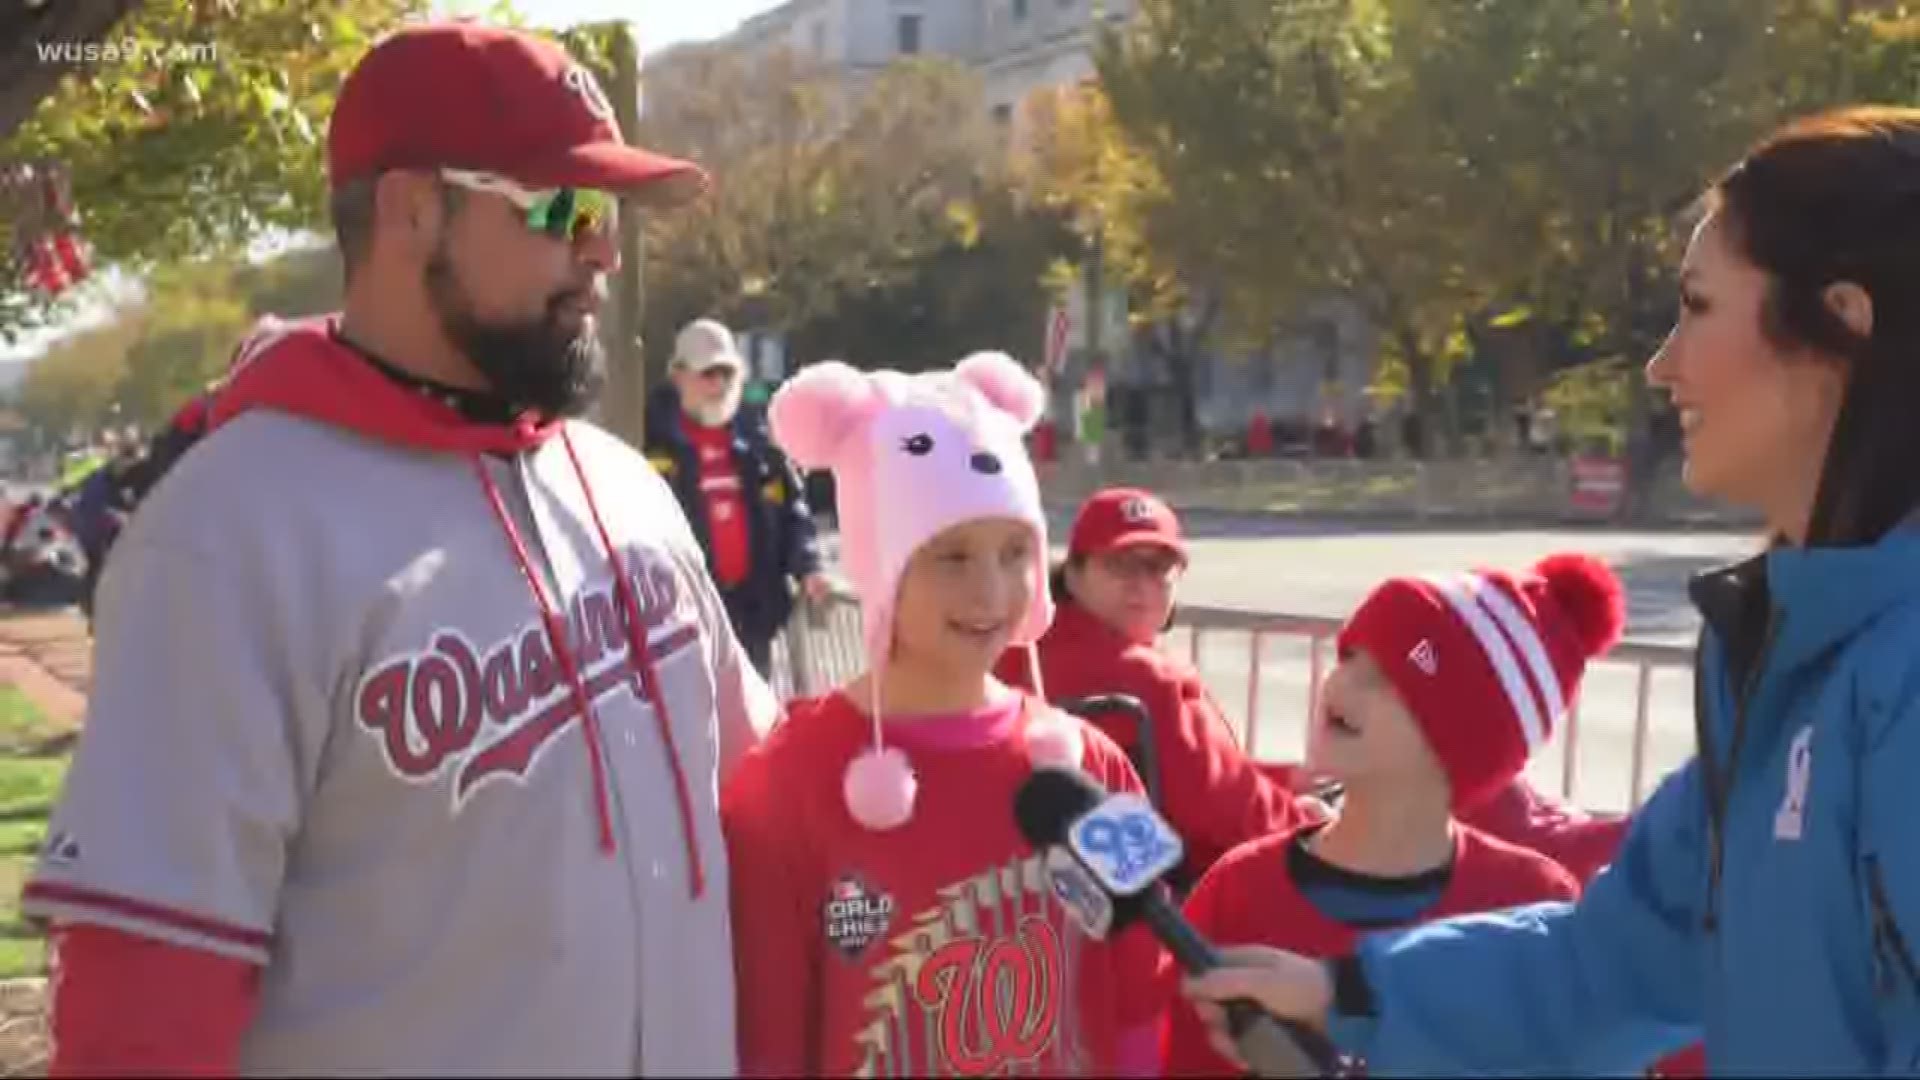 Washington Nationals fans from all over made sure to arrive early to get a good spot for the World Series victory parade Saturday.